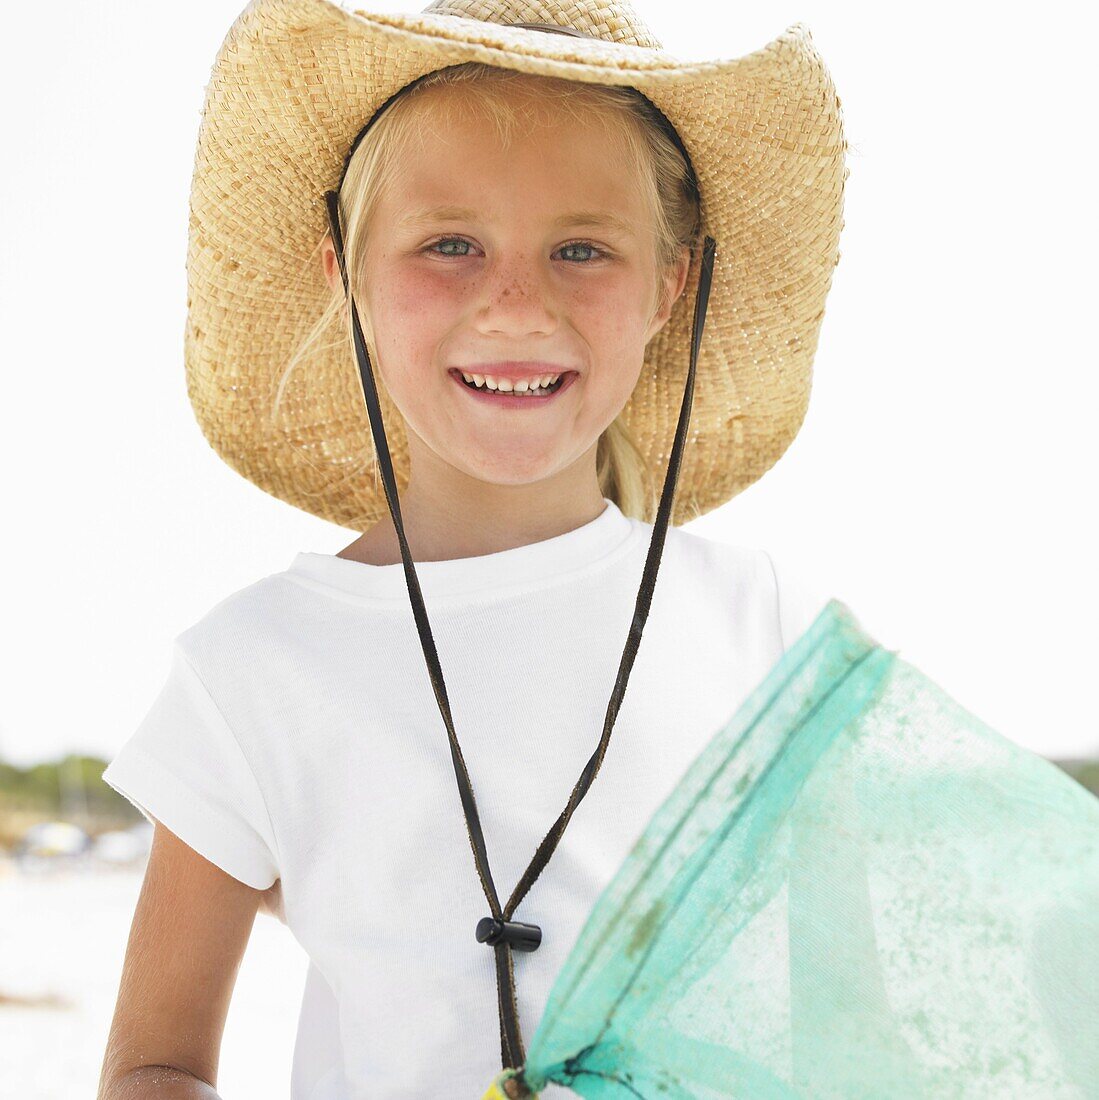 Girl (6-8) on beach wearing straw hat, carrying fishing pole